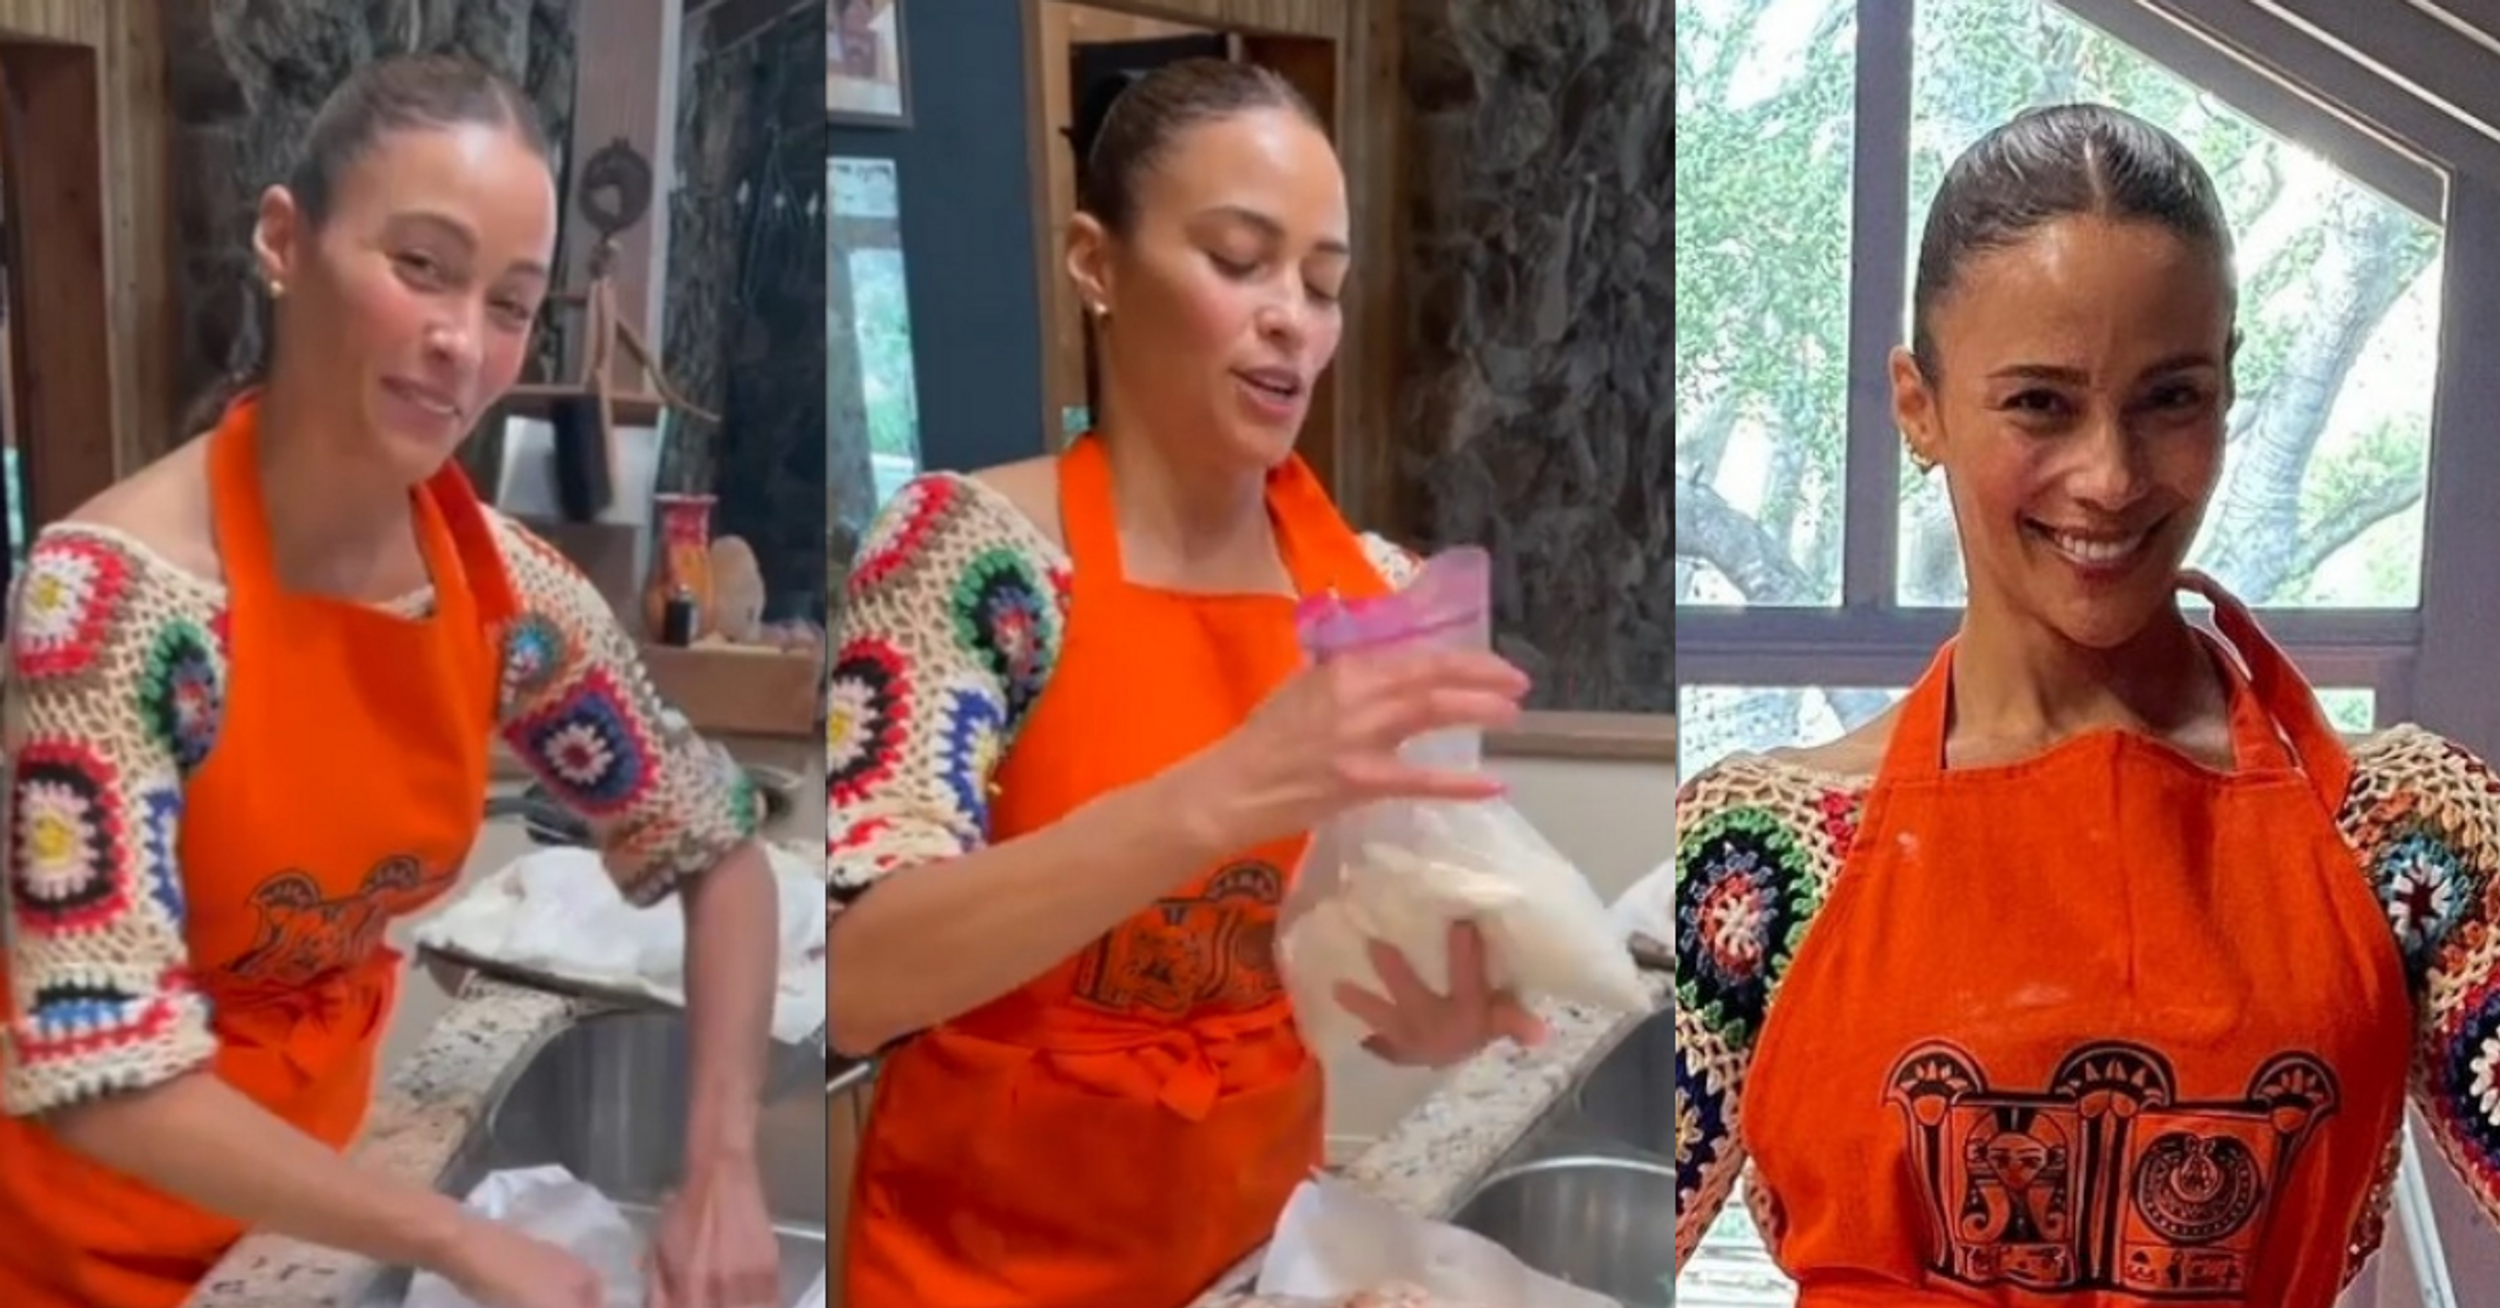 Paula Patton's Bizarre Method Of Cooking Fried Chicken Has The Internet Losing Their Minds